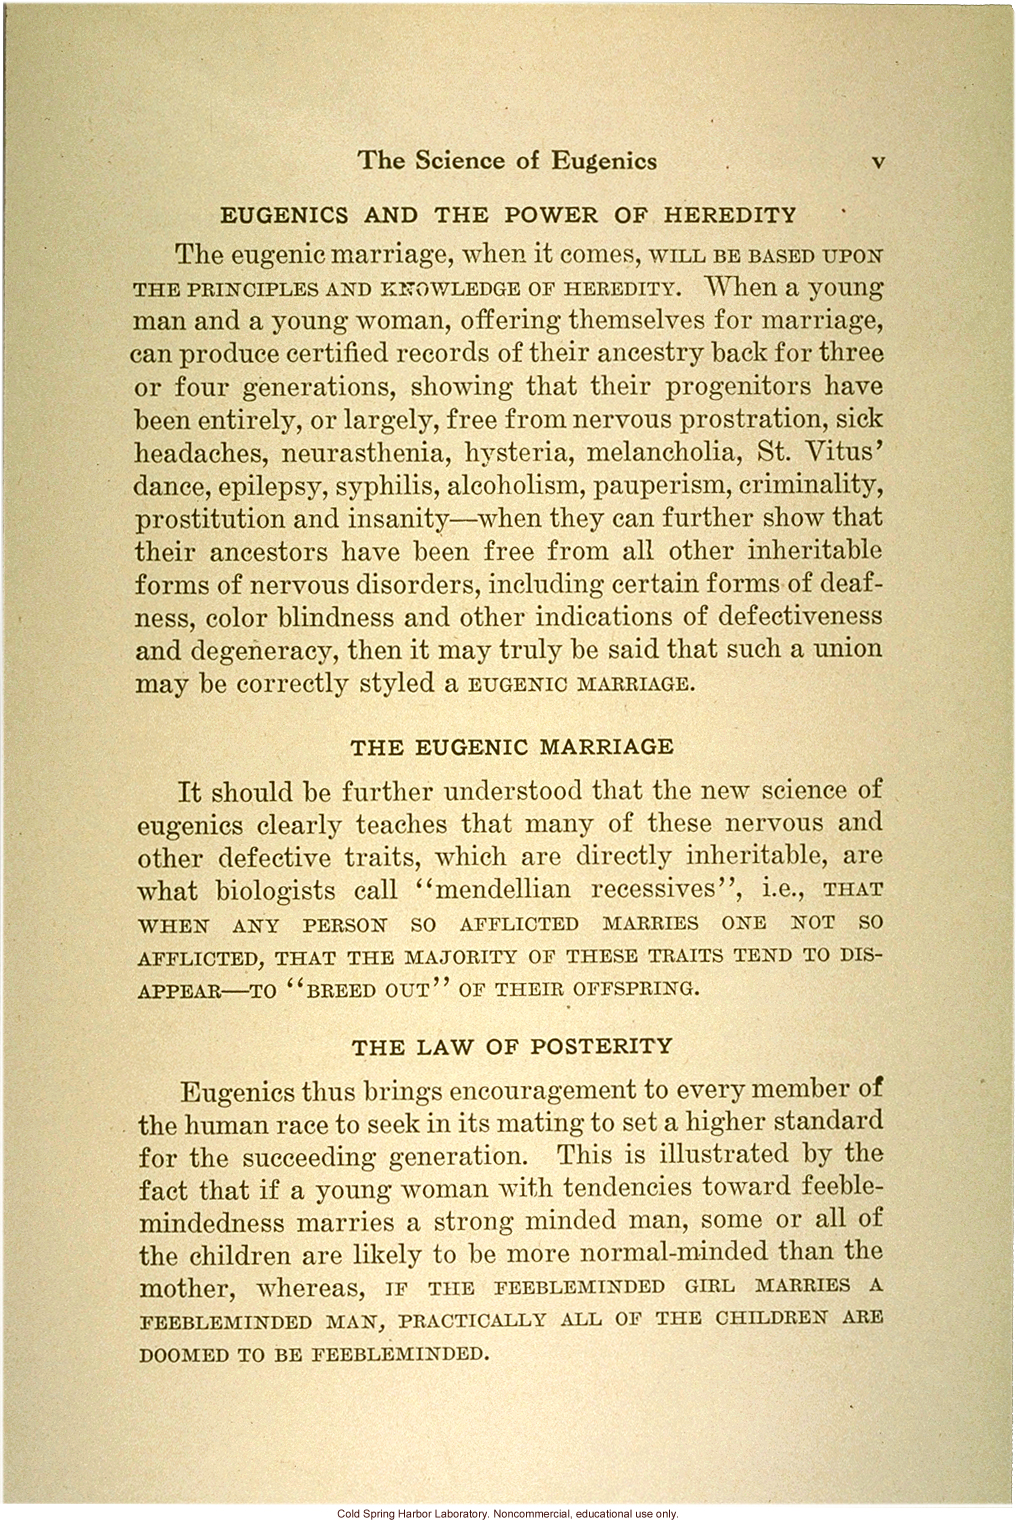 &quote;The science of eugenics and sex-life, love, marriage, maternity: the regeneration of the human race,&quote; by W.J. Hadden, C.H. Robinson, and M.R. Melendy